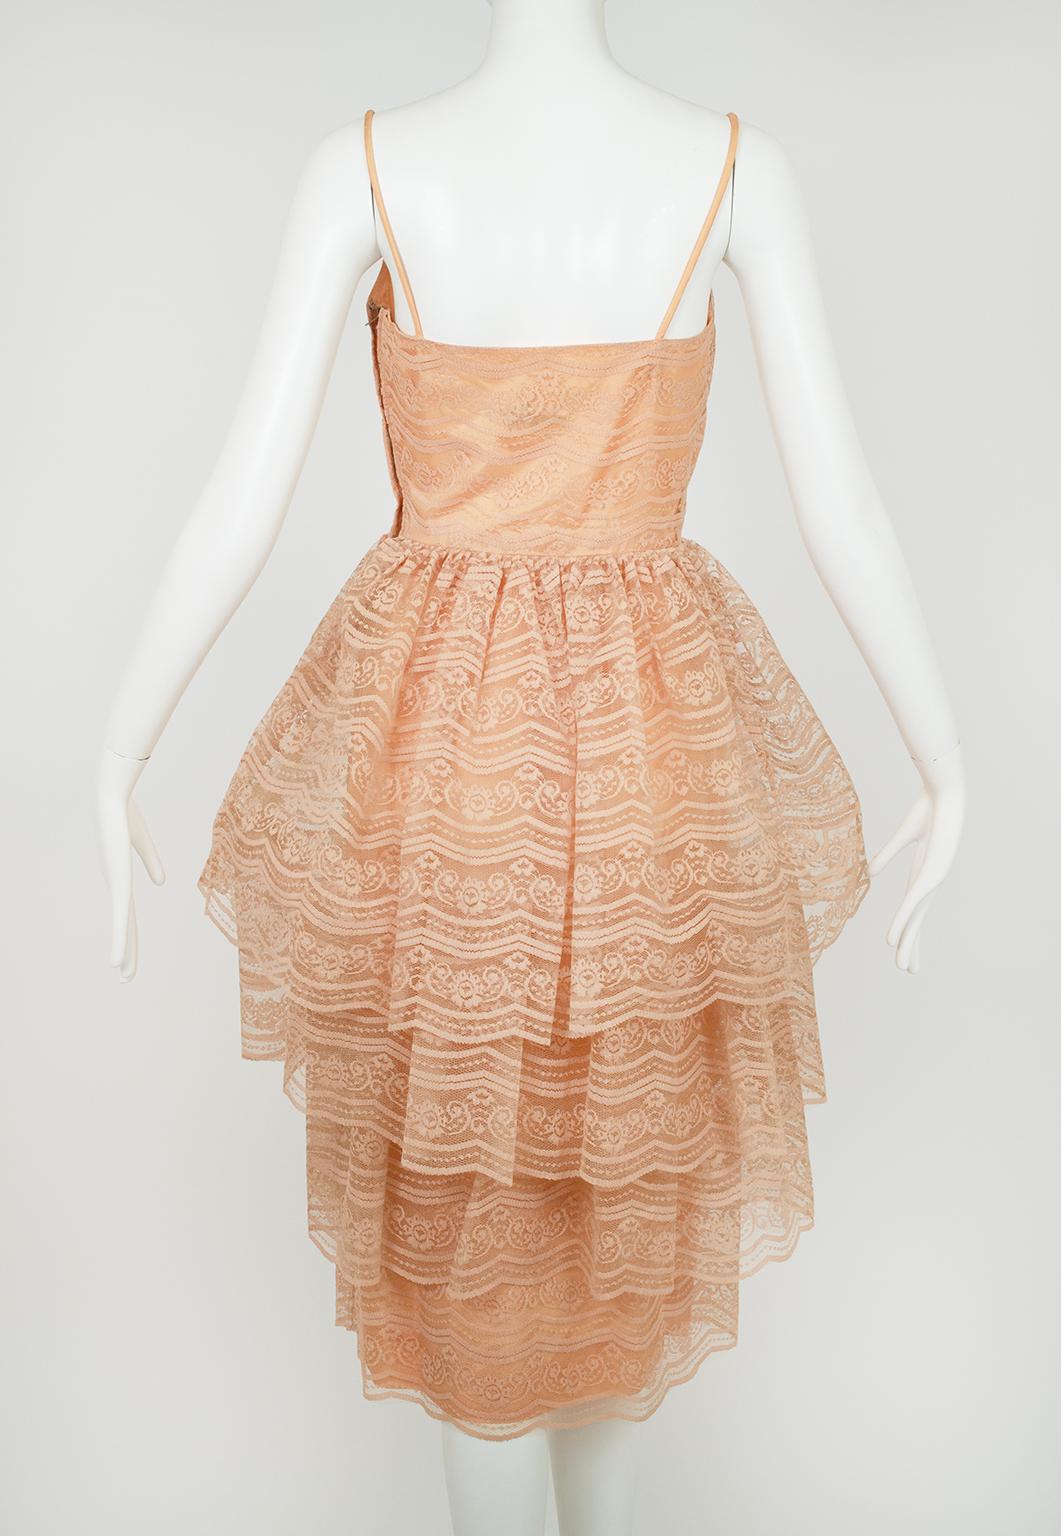 Nude Lace Lampshade Funnel Skirt Cocktail Party Dress – XS, 1960s For Sale 1